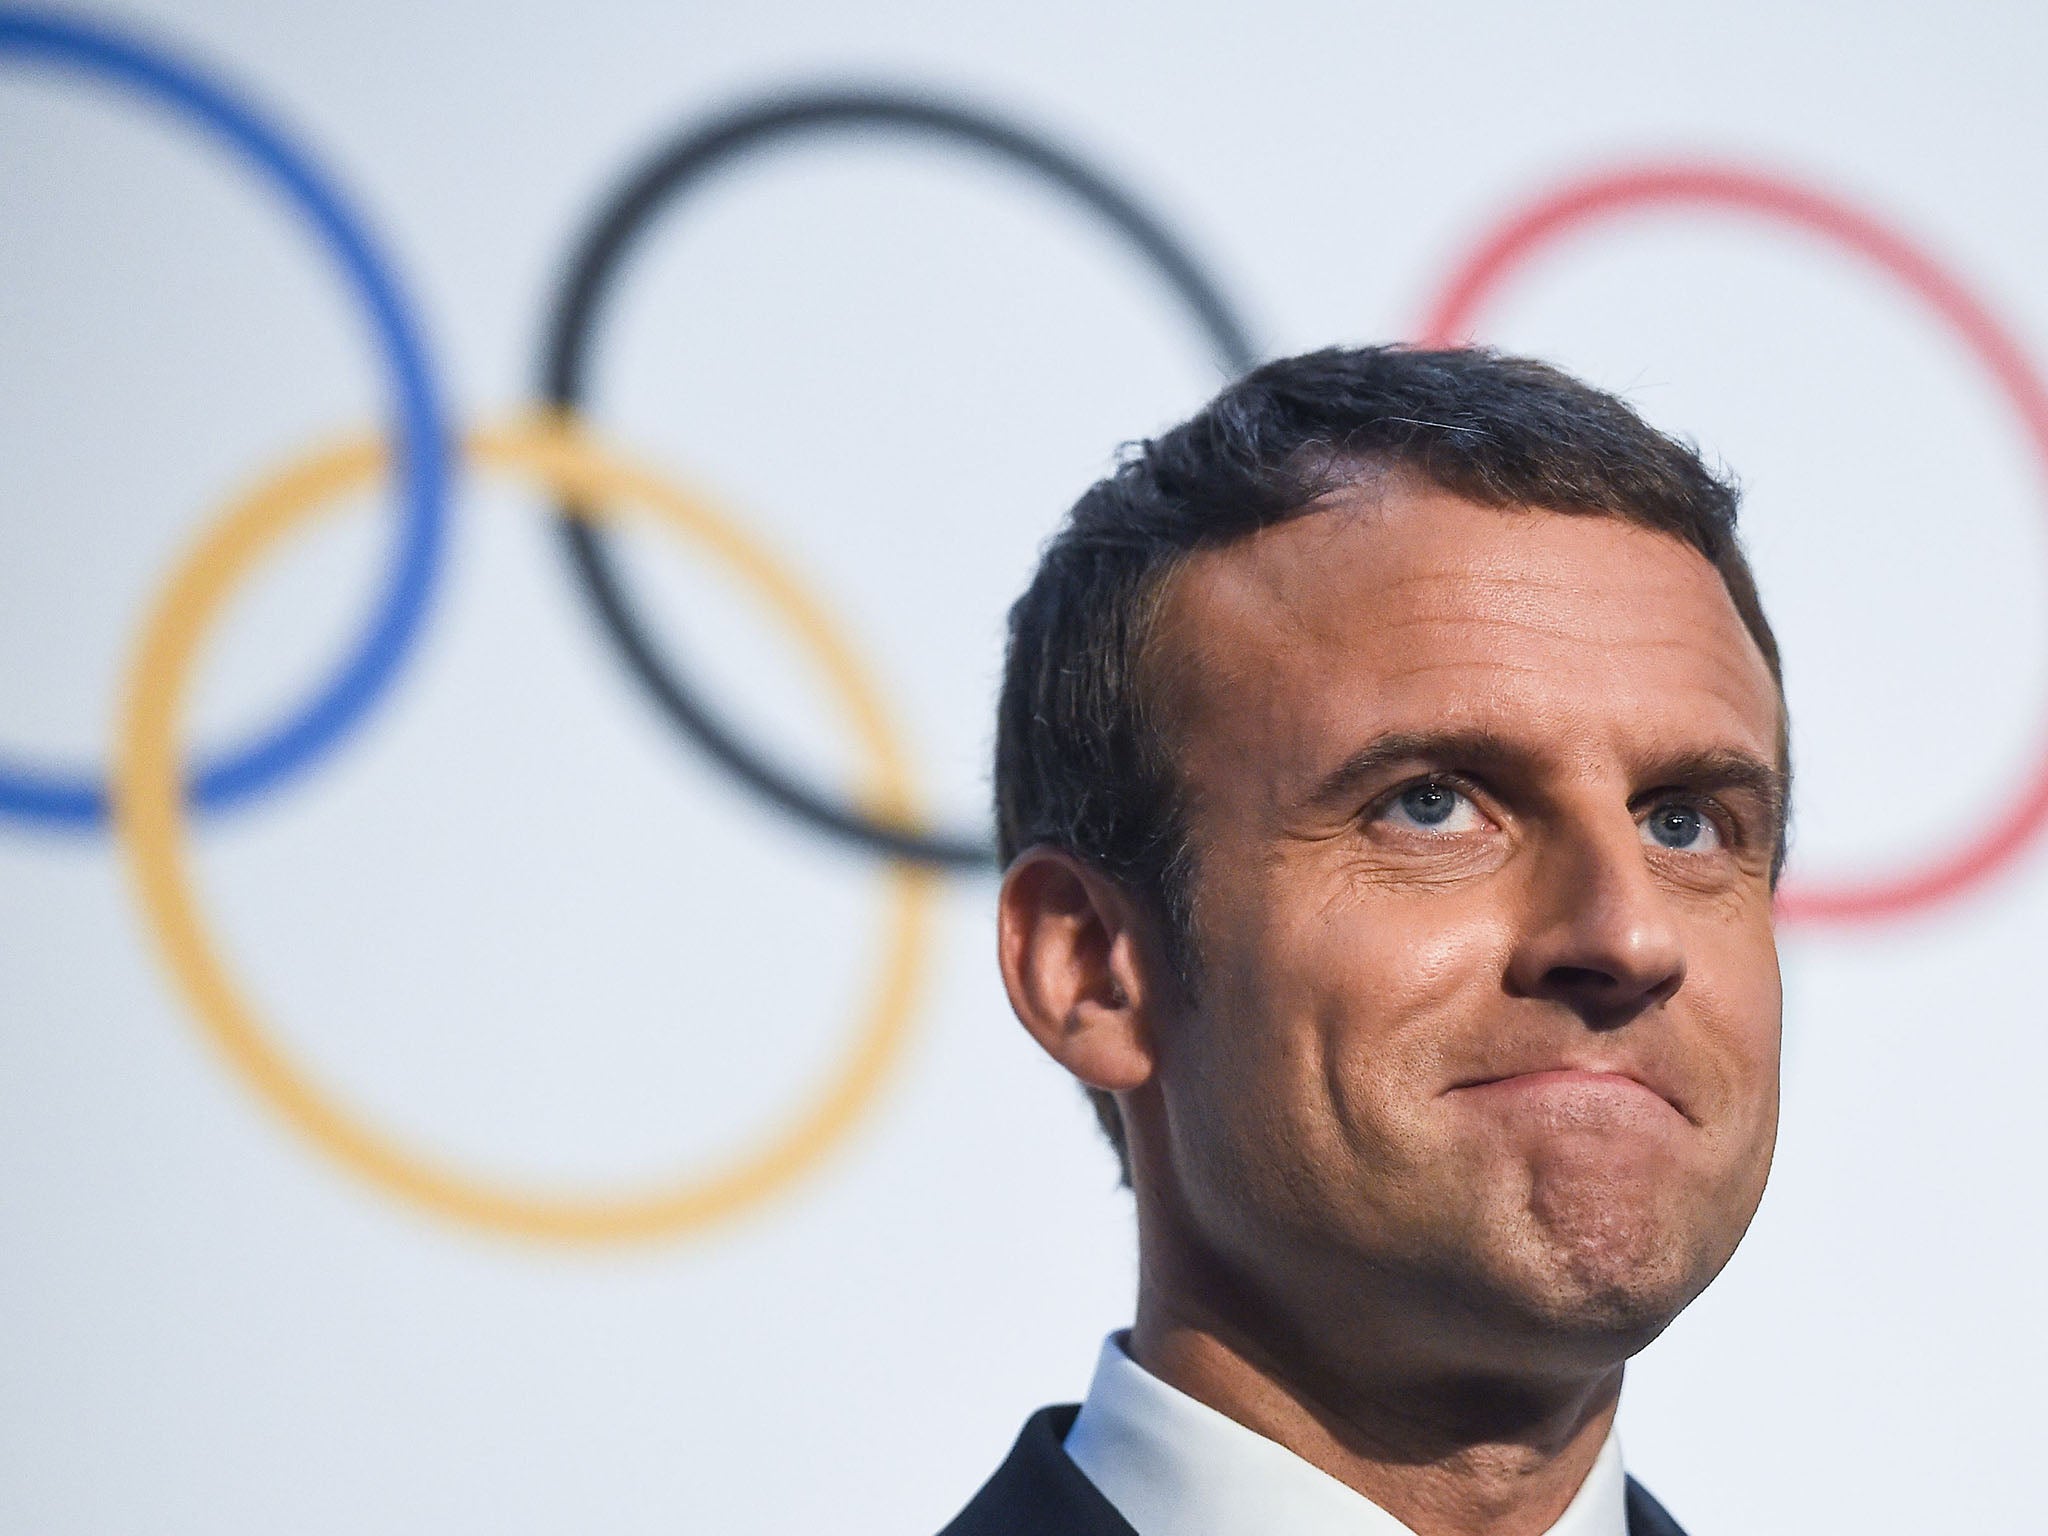 emmanuel macron says olympics opening ceremony may be moved due to security fears